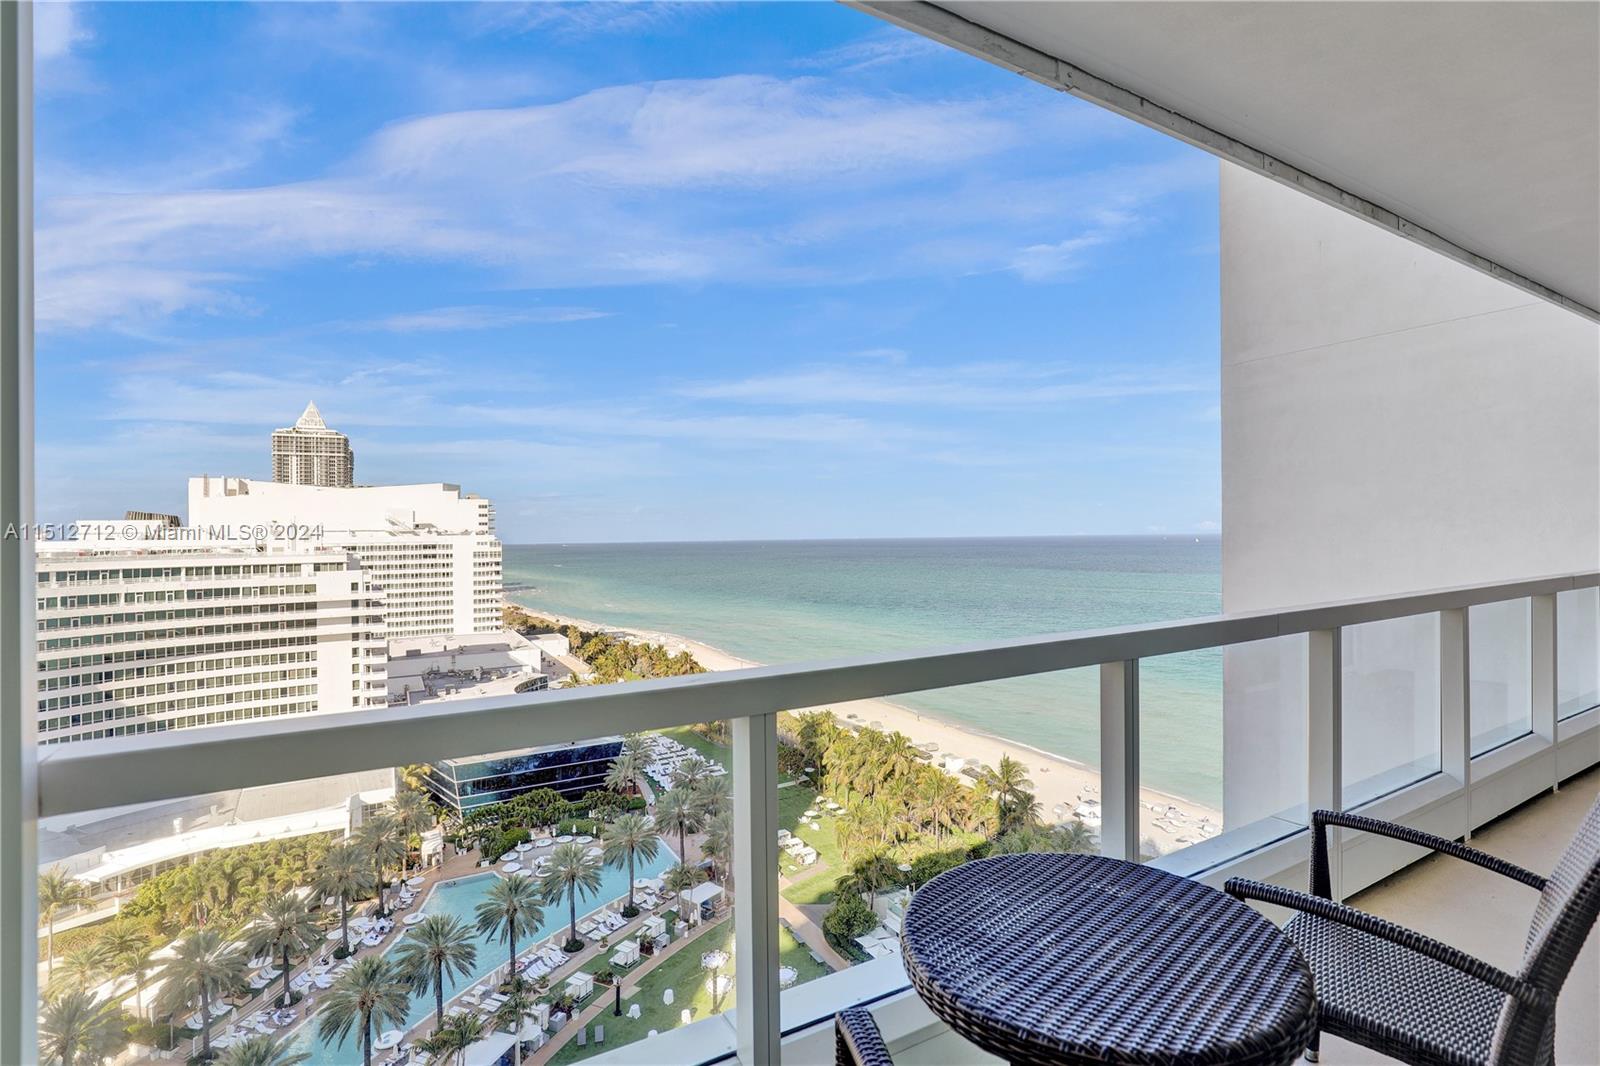 BEAUTIFUL 1/1,5 BEDROOM AT WORLD FAMOUS FONTAINEBLEAU RESORT, OVERSIZED BALCONY OVERLOOKING TO THE OCEAN AND POOL.FULLY FURNISHED TUNKEY 2 FLAT TV'S,COMPUTER WITH DESK,SLEEPER SOFA,FULLY EQUIPPED KITCHEN, KITCHENWARE, DISHWASHER, WASHER&DRYER. FONTAINEBLEAU OFFERS 22 OCEANFRONT ACRES, MANY TOP RESTAURANTS AND NIGHTCLUBS, SPA, FITNESS CENTER.POOLS.MAINTENANCE FEES INCLUDED:AC,ELECTRICITY,FREE VALET,LOCAL PHONES AND COMPLIMENTARY BREAKFAST AT OWNERS LOUNGE. THERE WERE A LOT OF CELEBRITIES IN THIS LIST OF GUESTS WHO HAVE STAYED IN THIS SUITE BEFORE.DON'T MISS OUT THIS UNIQUE OPPORTUNITY TO PURCHASE ONE OF THE LAST EXCLUSIVE 1 BEDROOM SUITES IN FONTAINEBLEAU HOTEL MIAMI BEACH